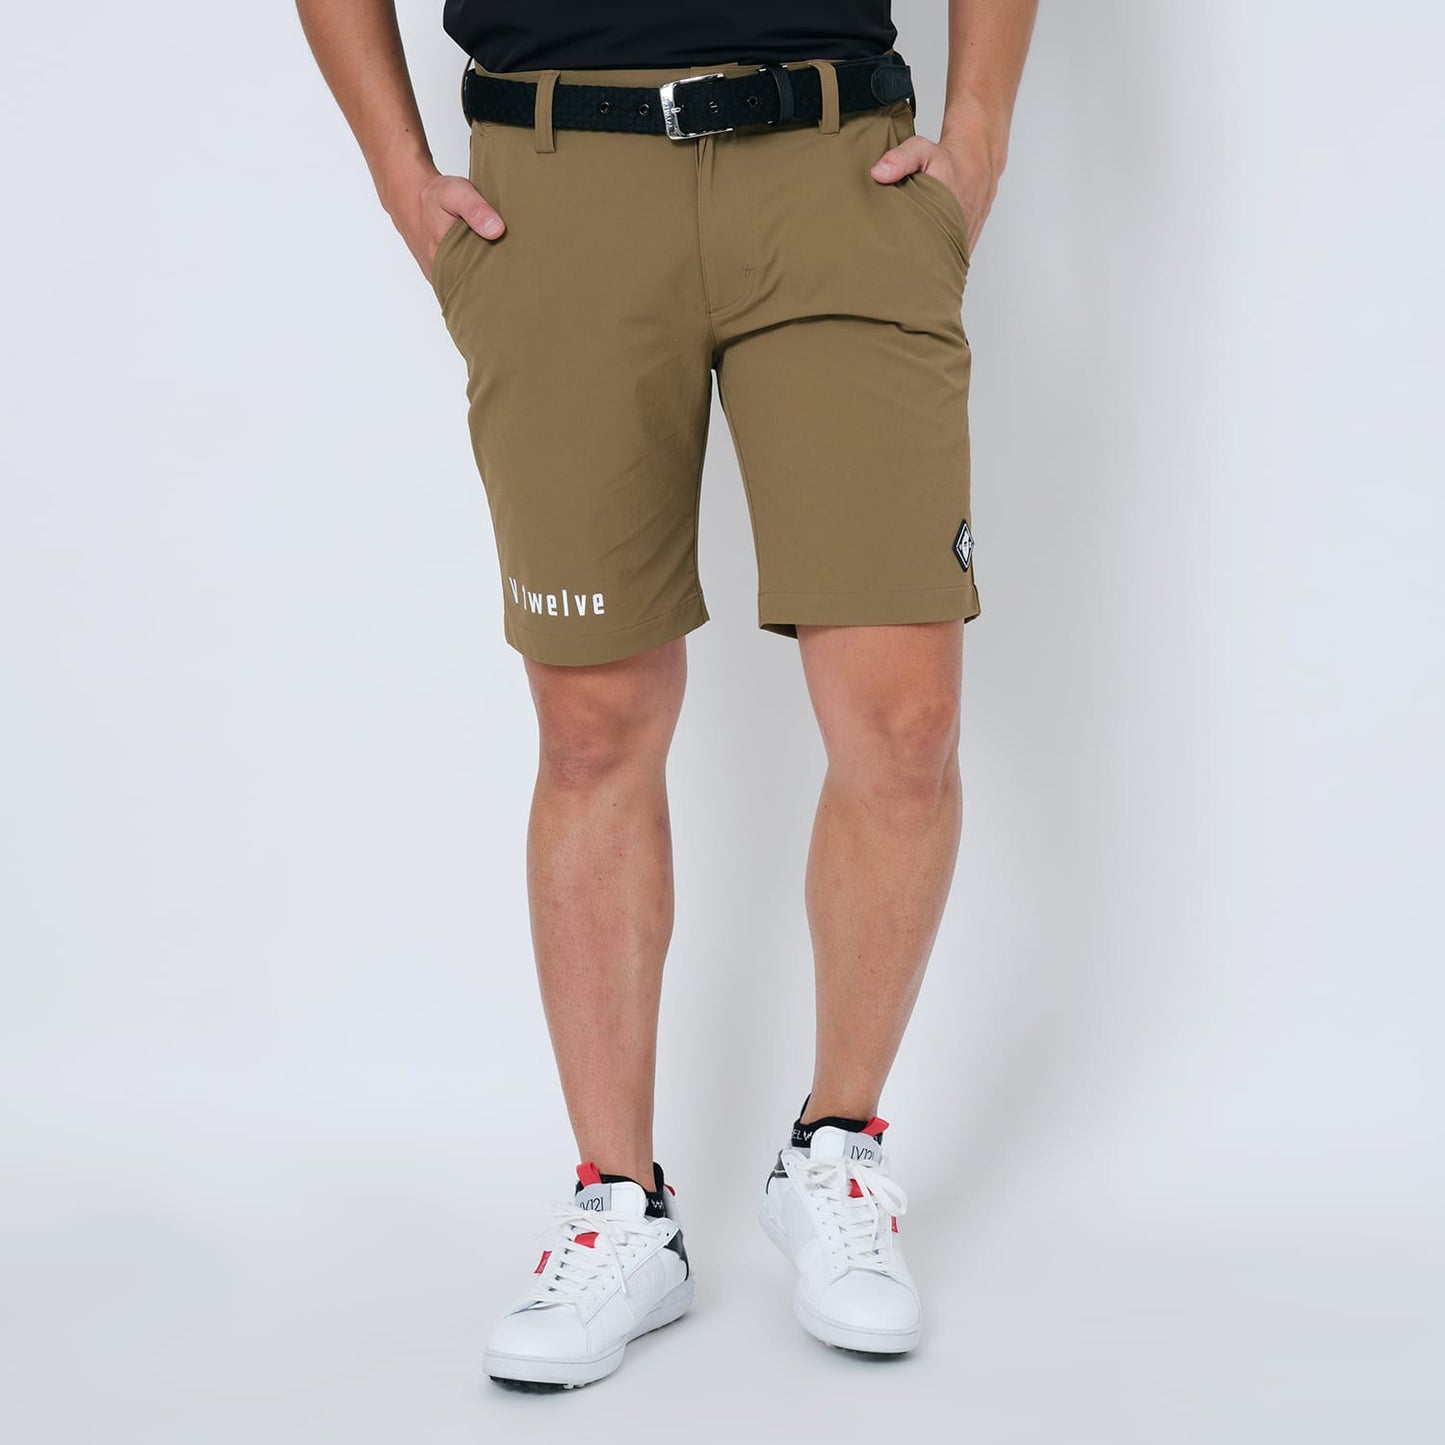 BYVER SHORTS